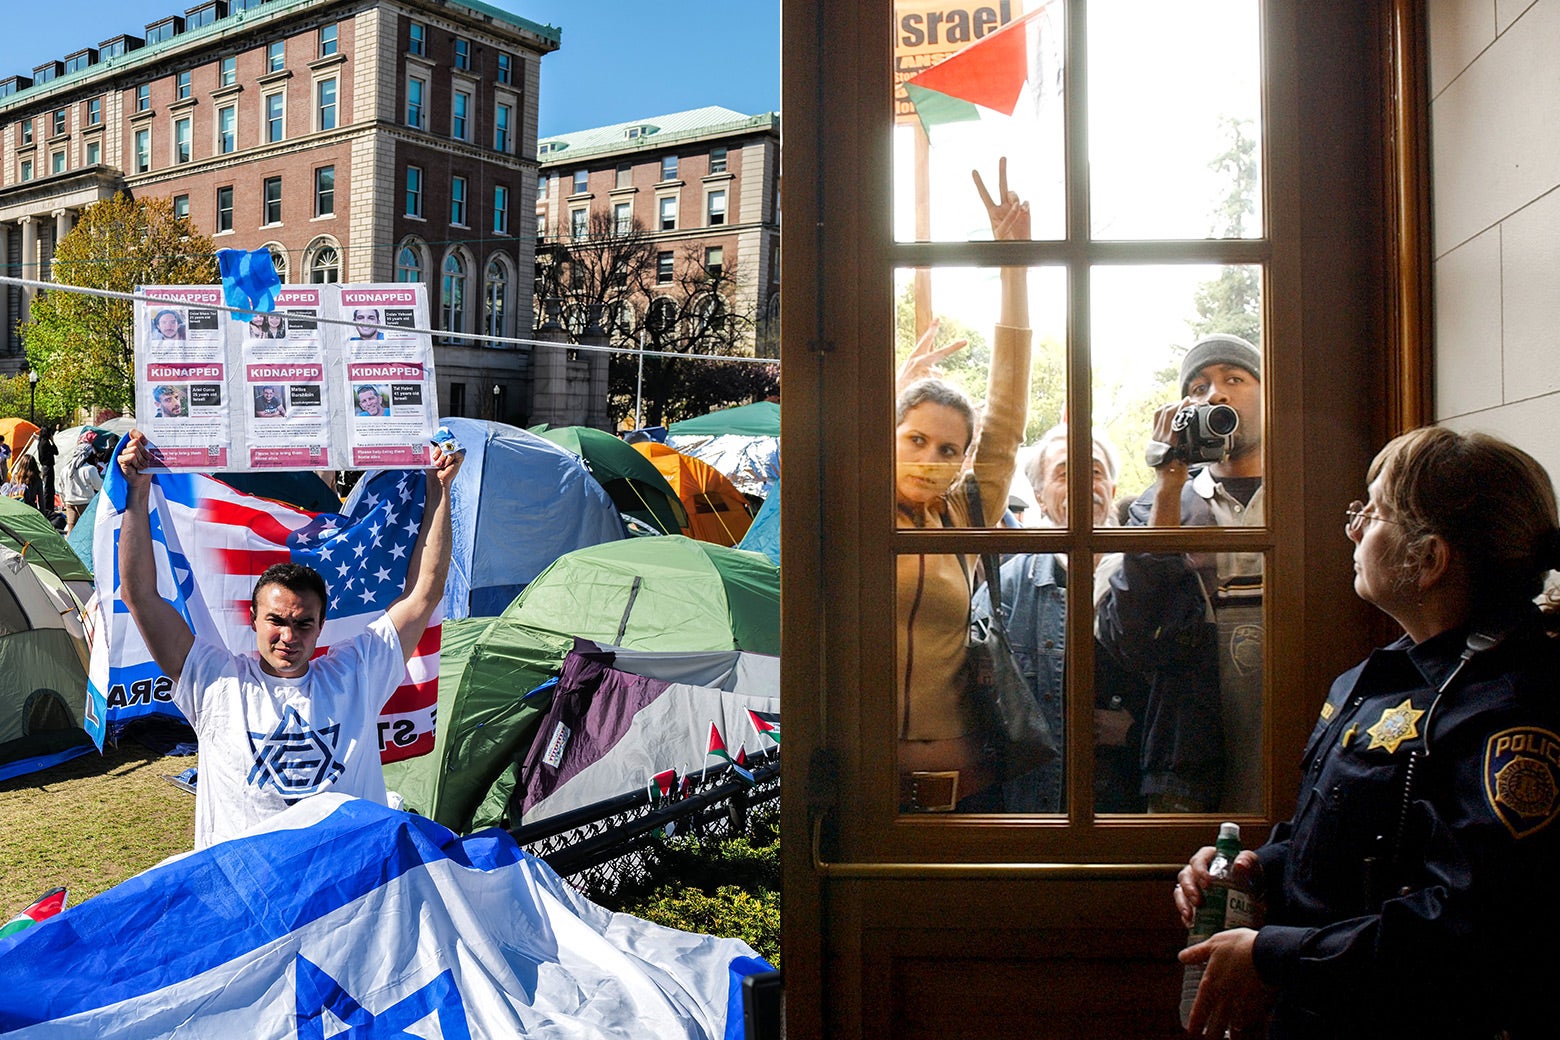 Left: A young man in a shirt with a Star of David and an Israeli flag in front of him holds up posters of kidnapped Israeli hostages in front of tents set up on Columbia's lawn. Right: Protesters, one with a camcorder filming, outside a door. On the other side of the door, being filmed, is a police officer.